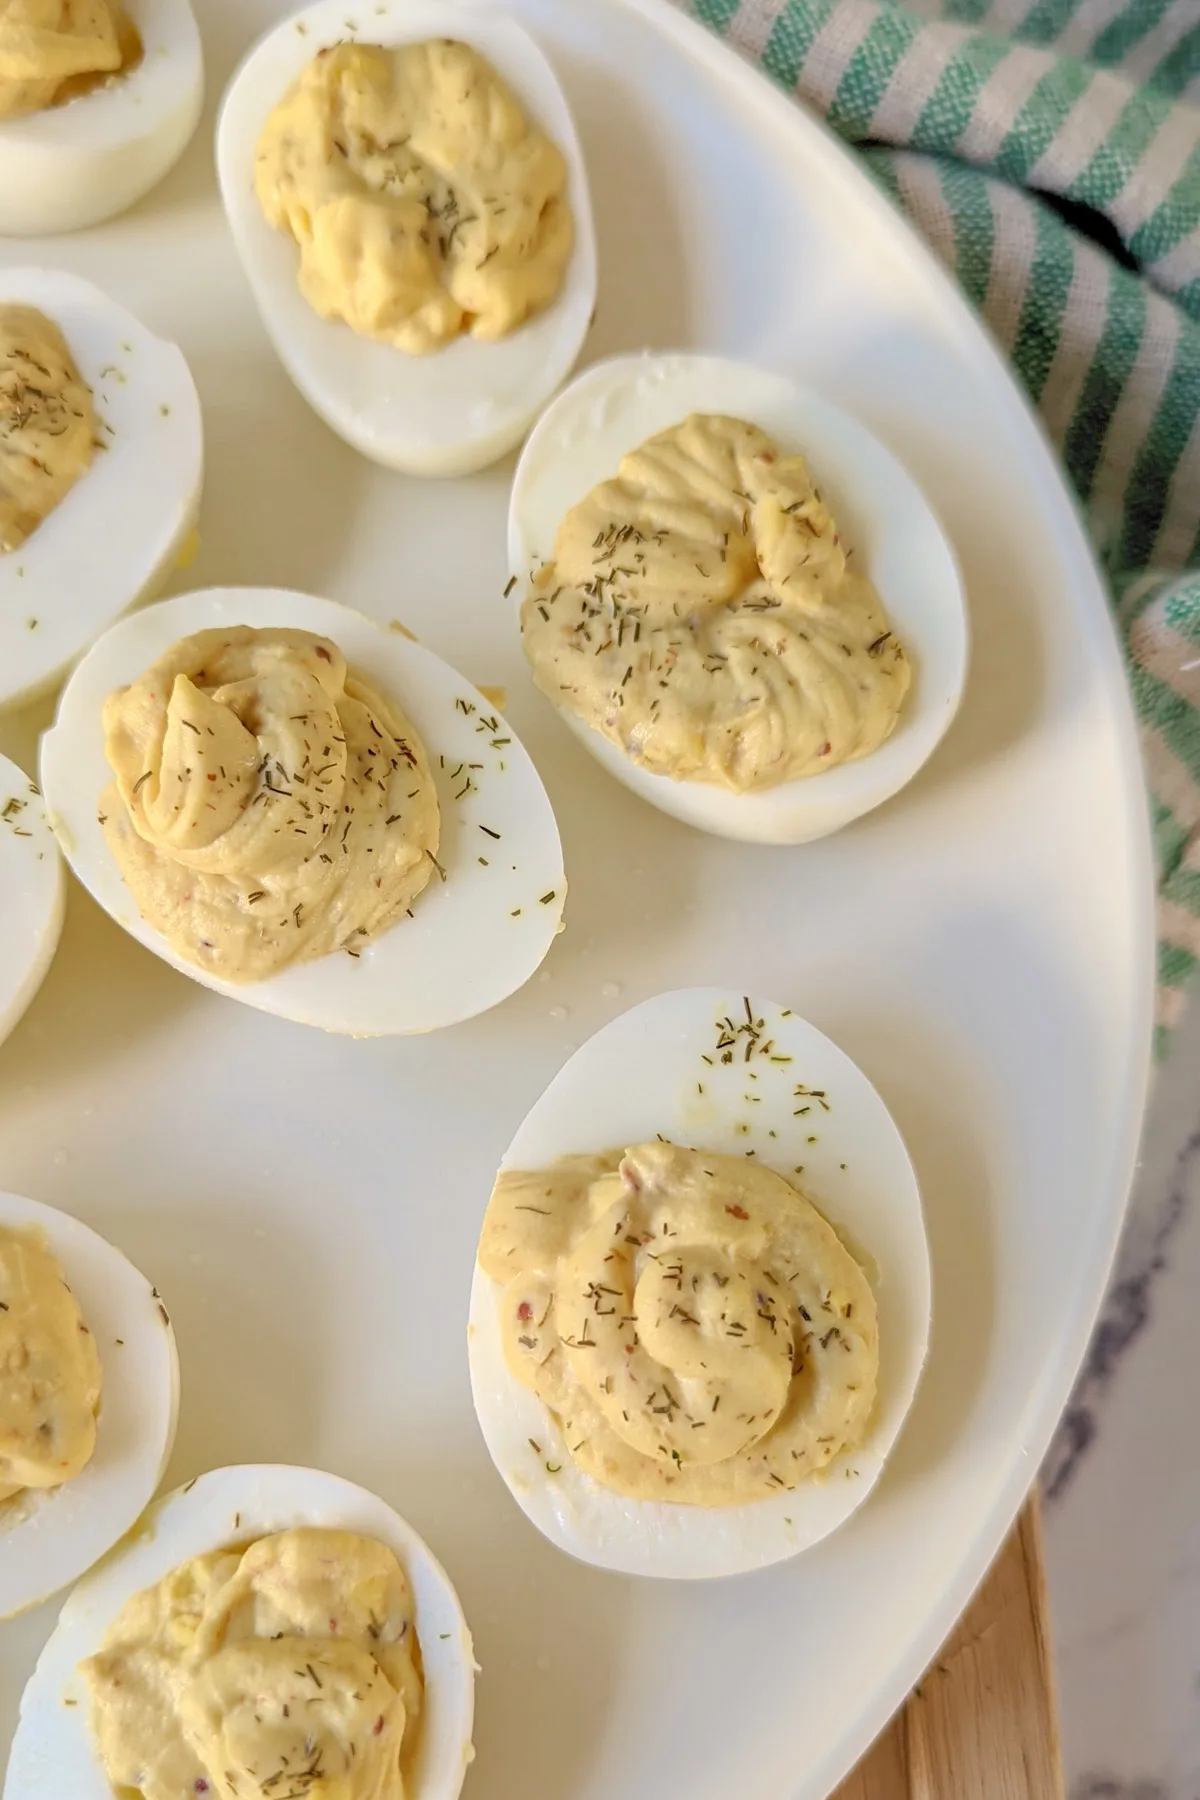 Deviled eggs without vinegar on a plate.